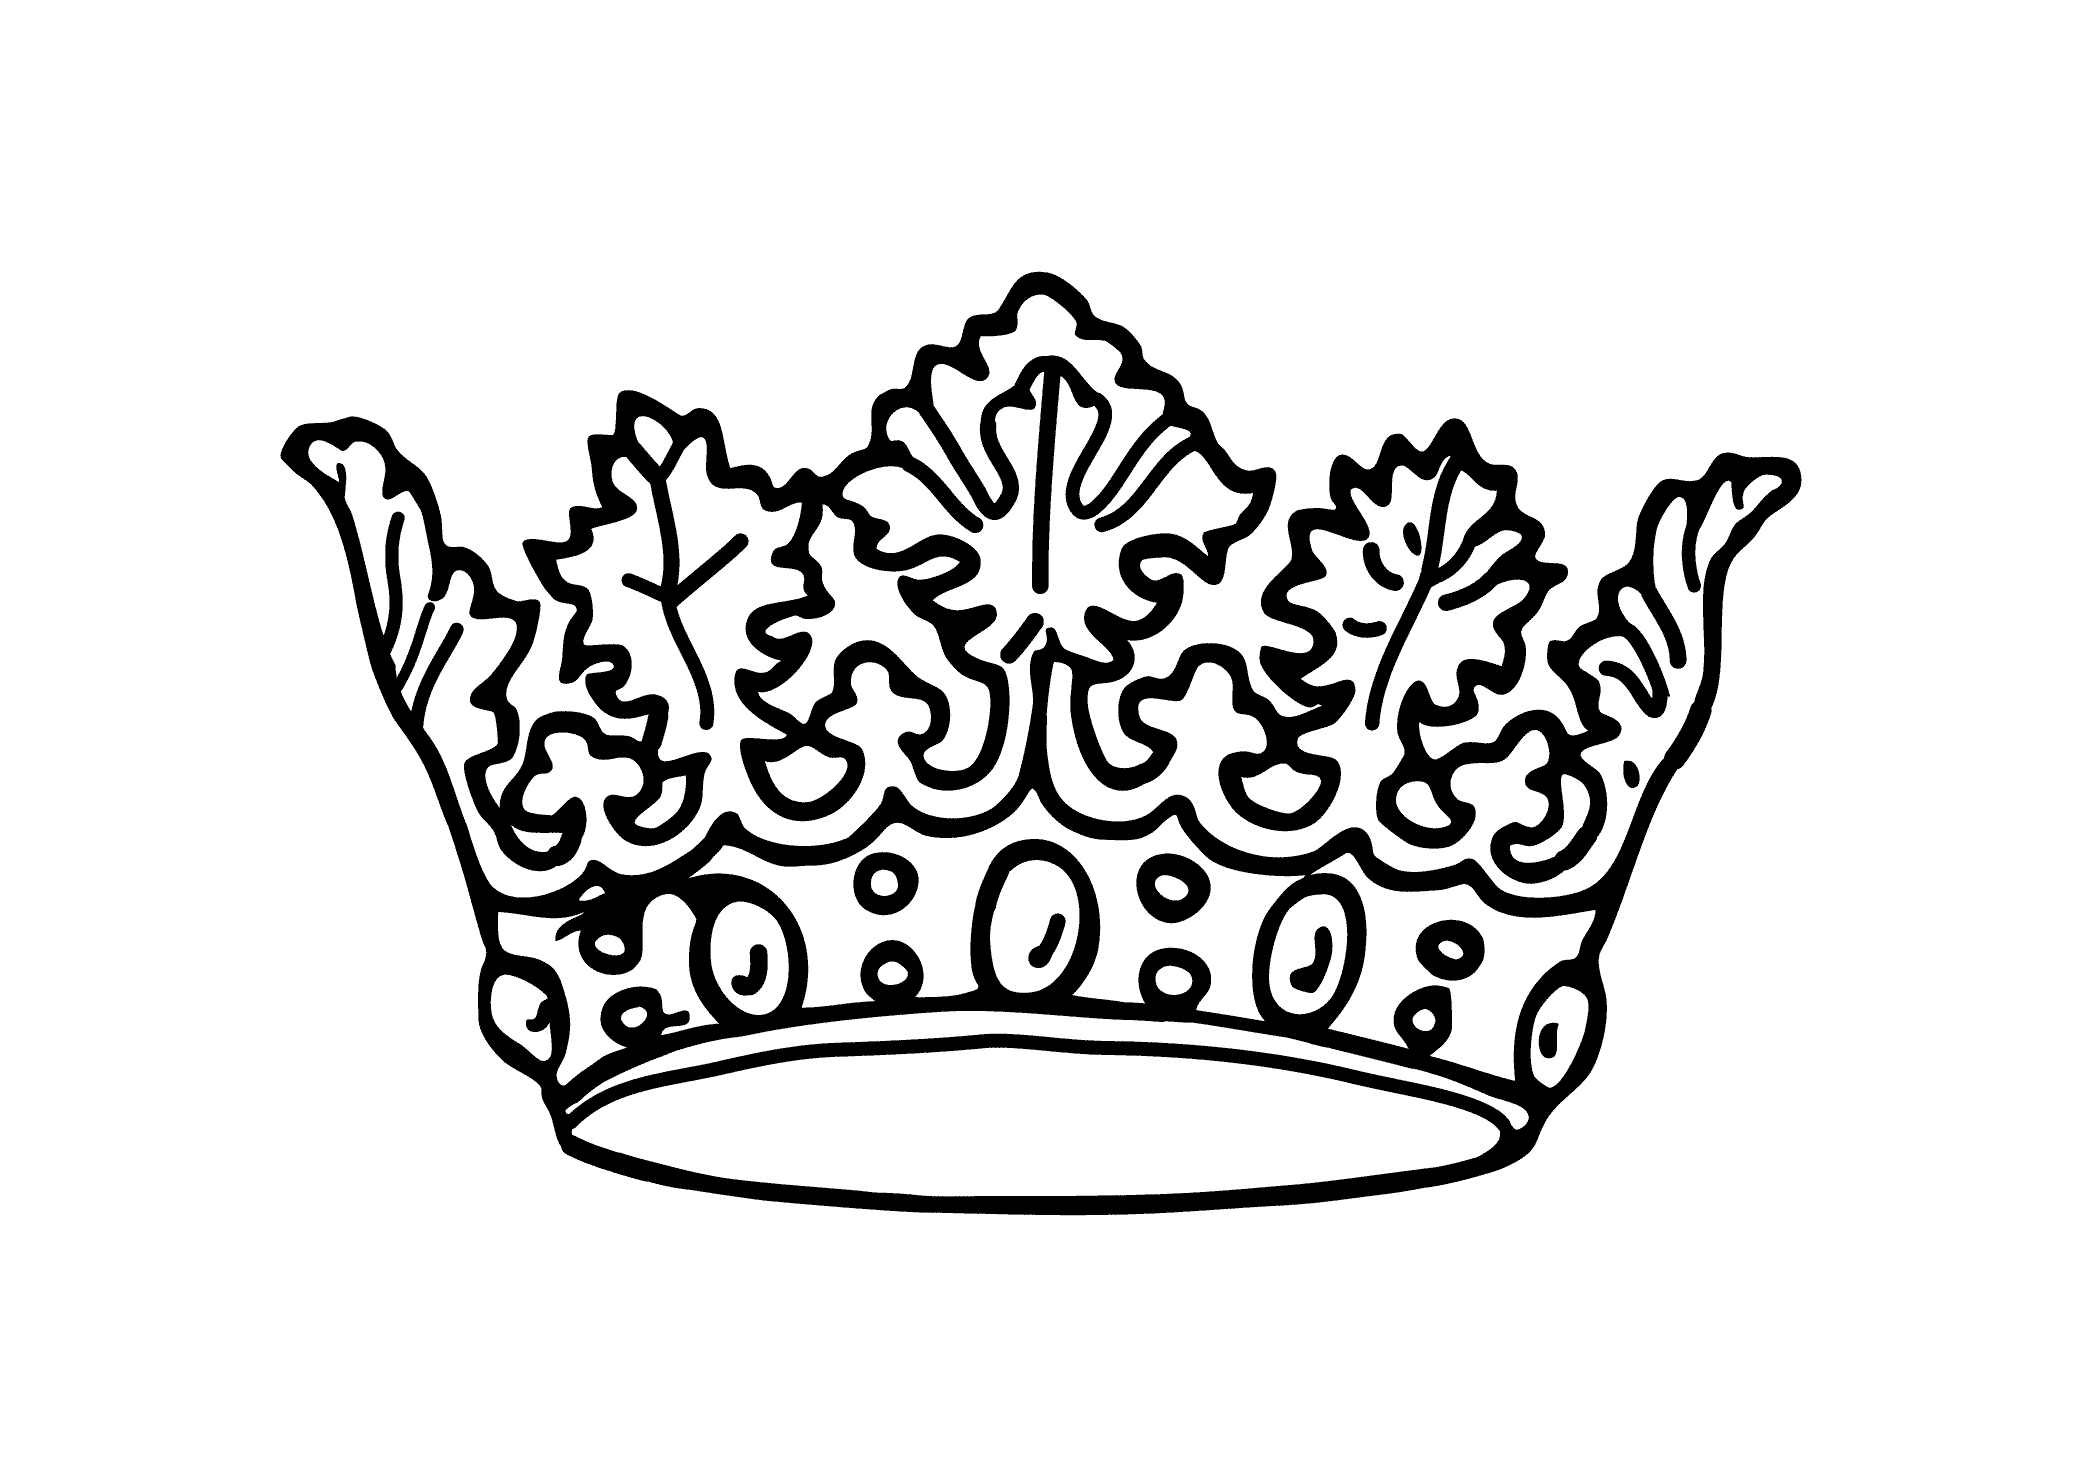 Girl S Crown 04 Coloring Page